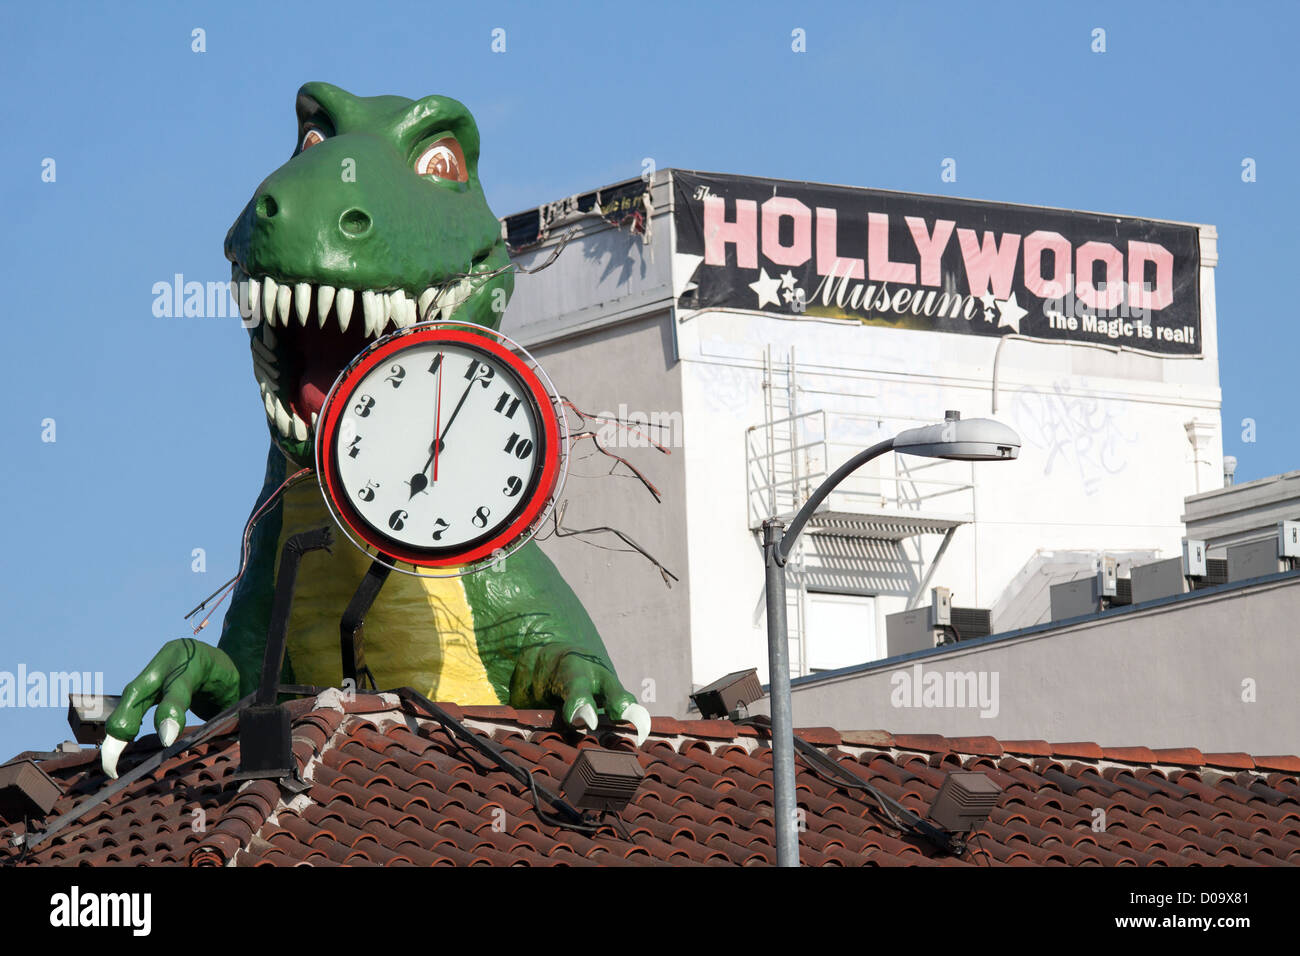 PLASTIC TYRANNOSAURUS REX DINOSAUR ON ROOF RIPLEY'S BELIEVE IT OR NOT MUSEUM IN HOLLYWOOD LOS ANGELES CALIFORNIA UNITED STATES Stock Photo